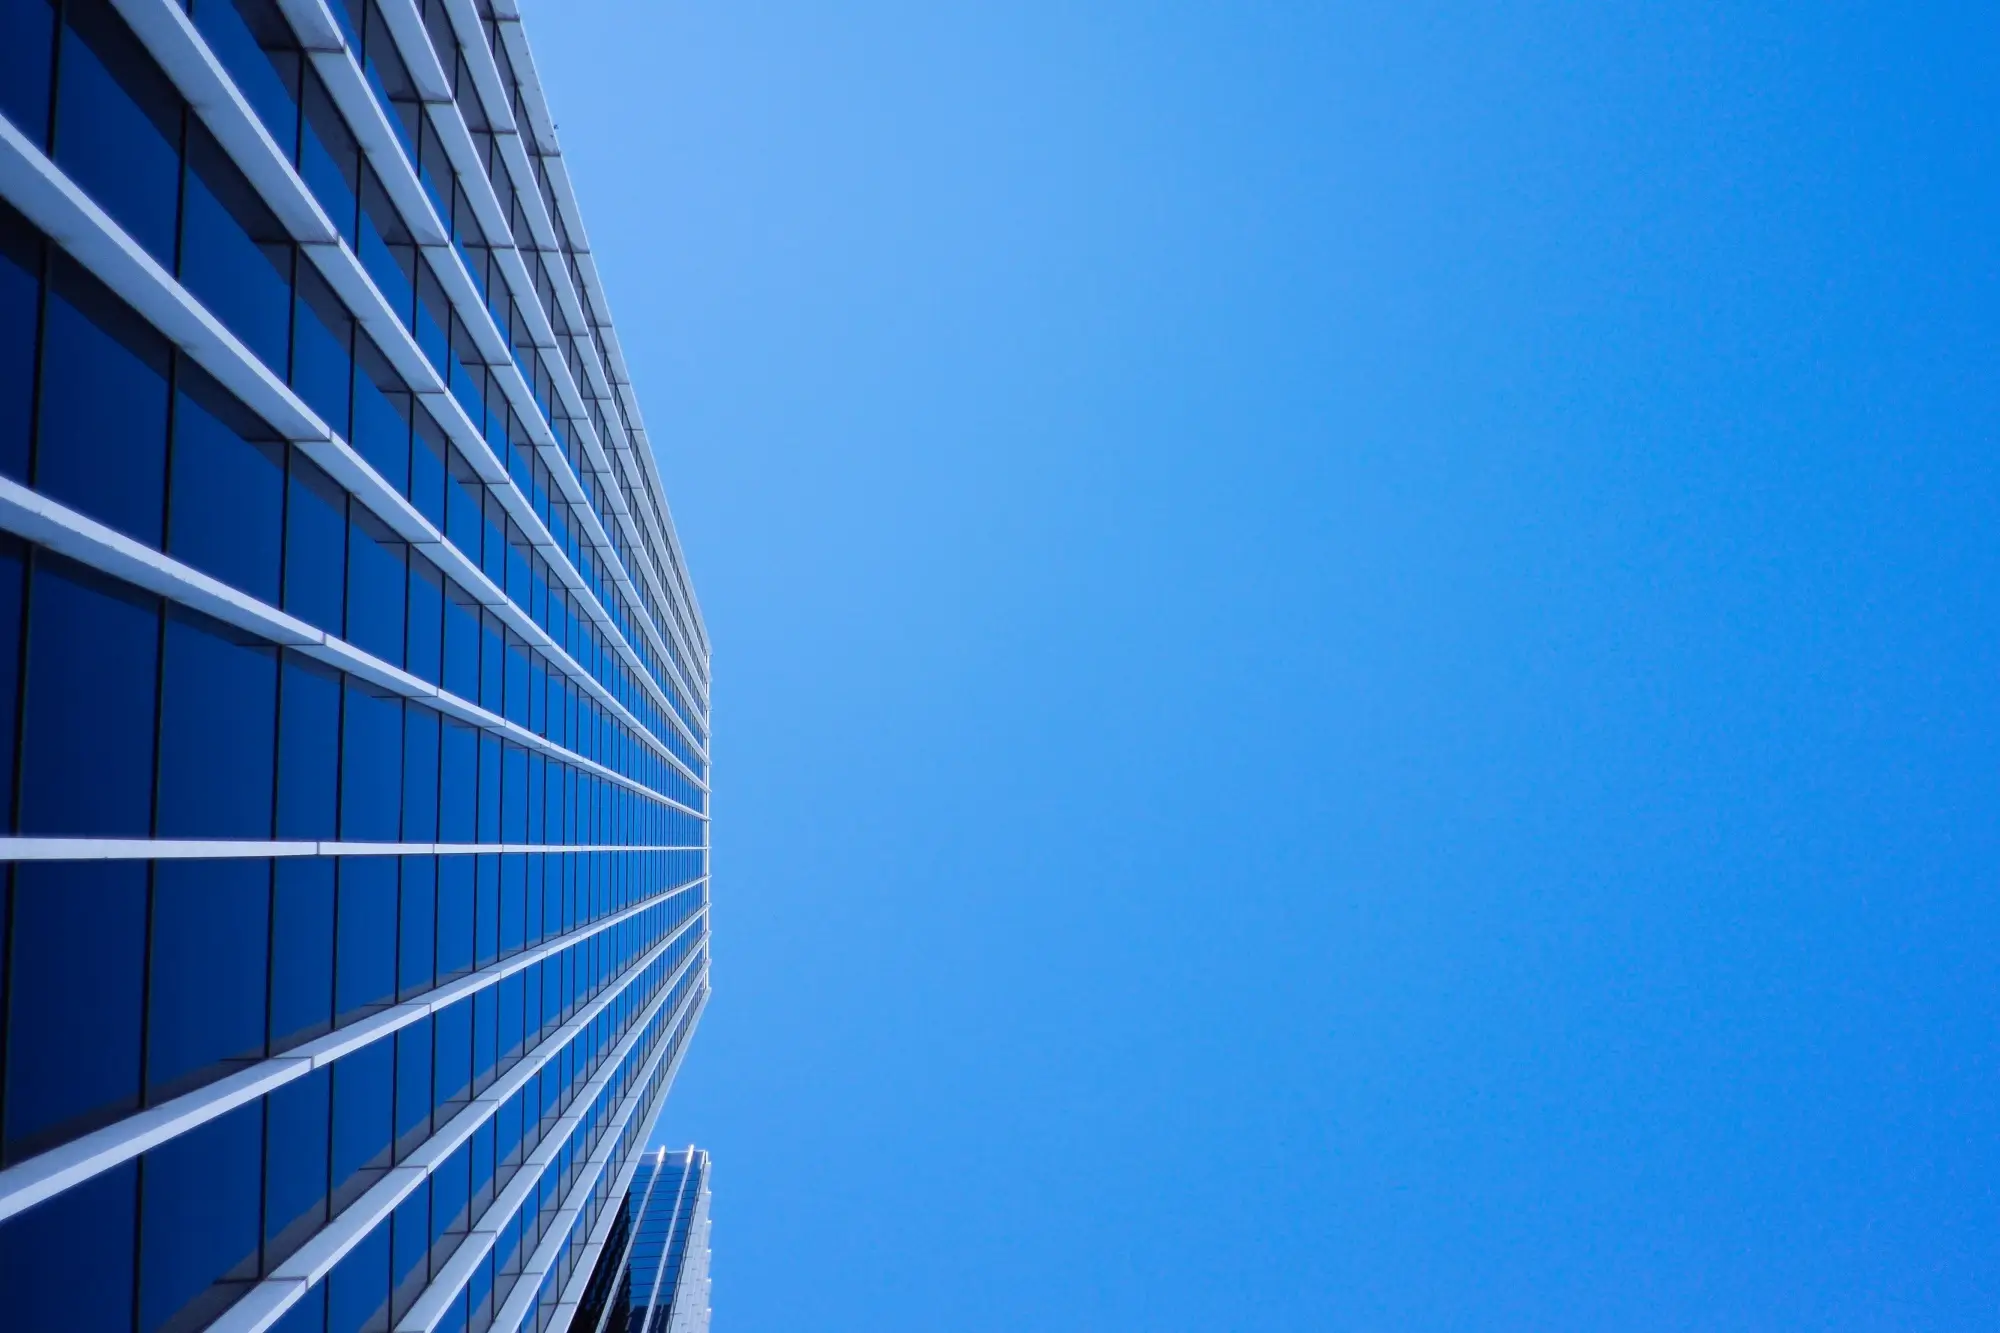 A worm's eye view of a skyscraper under the blue sky, representing the concept of controlled foreign company.